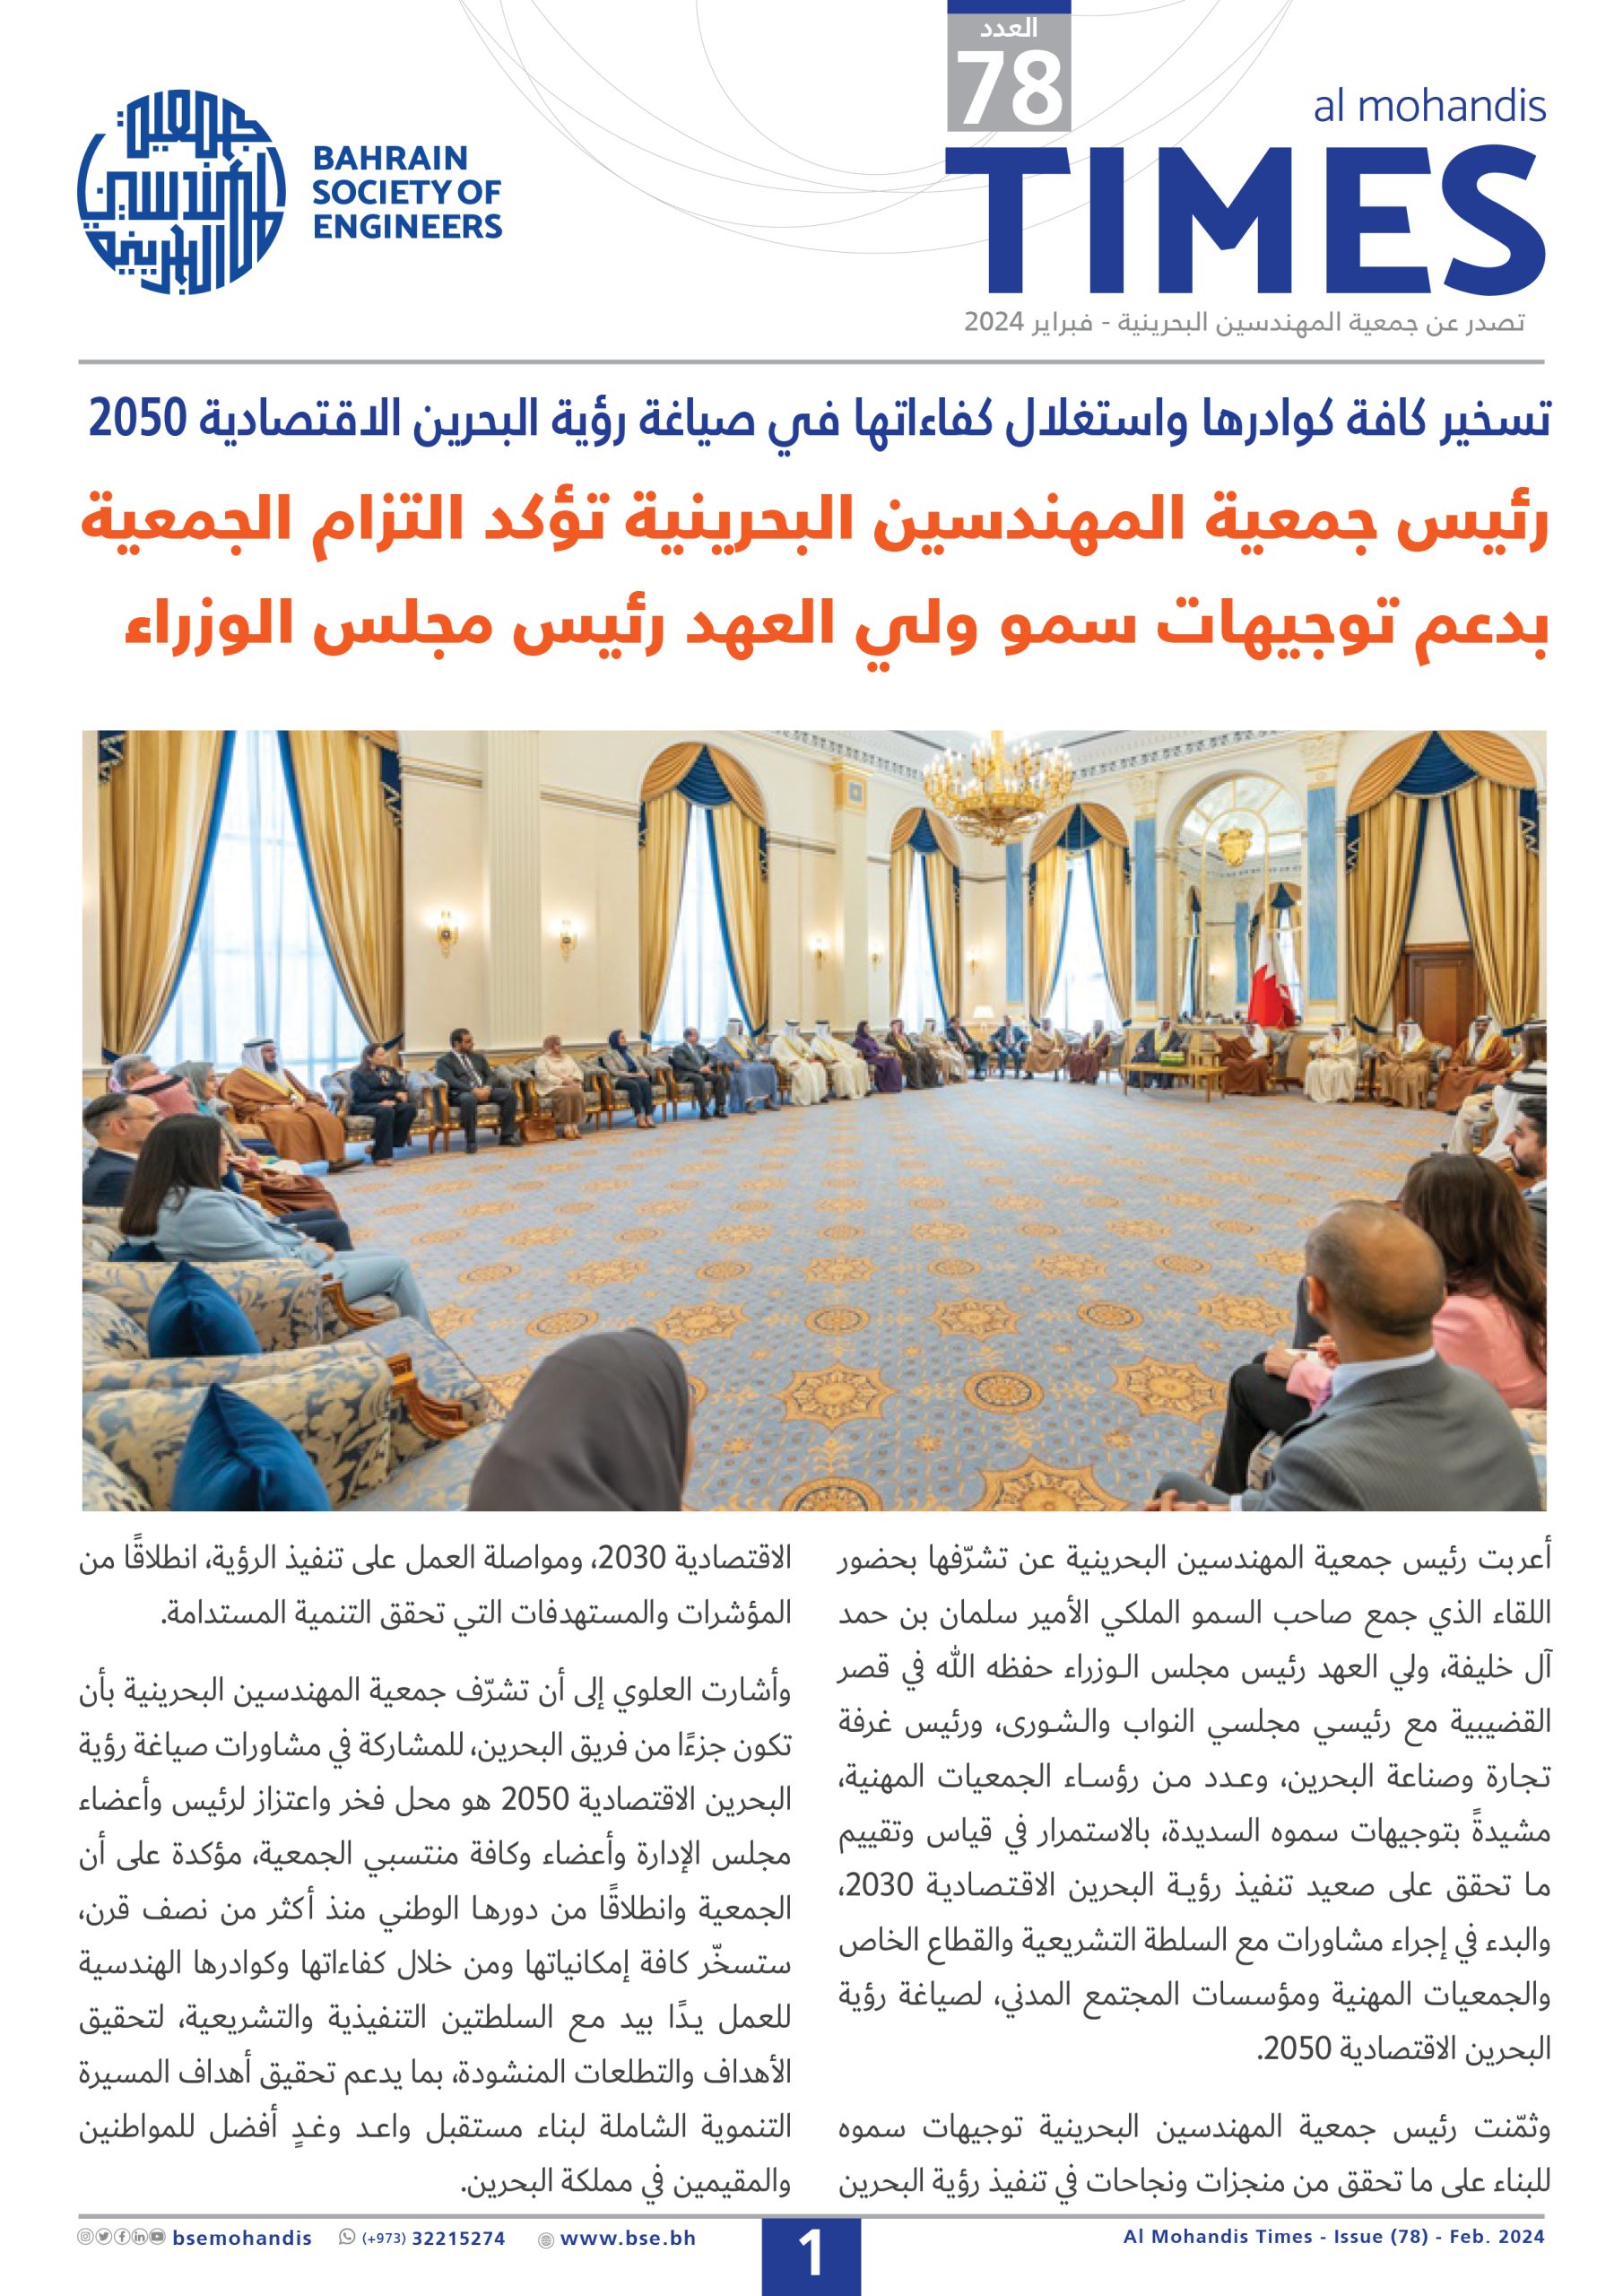 Al Mohandis Times Issue 78